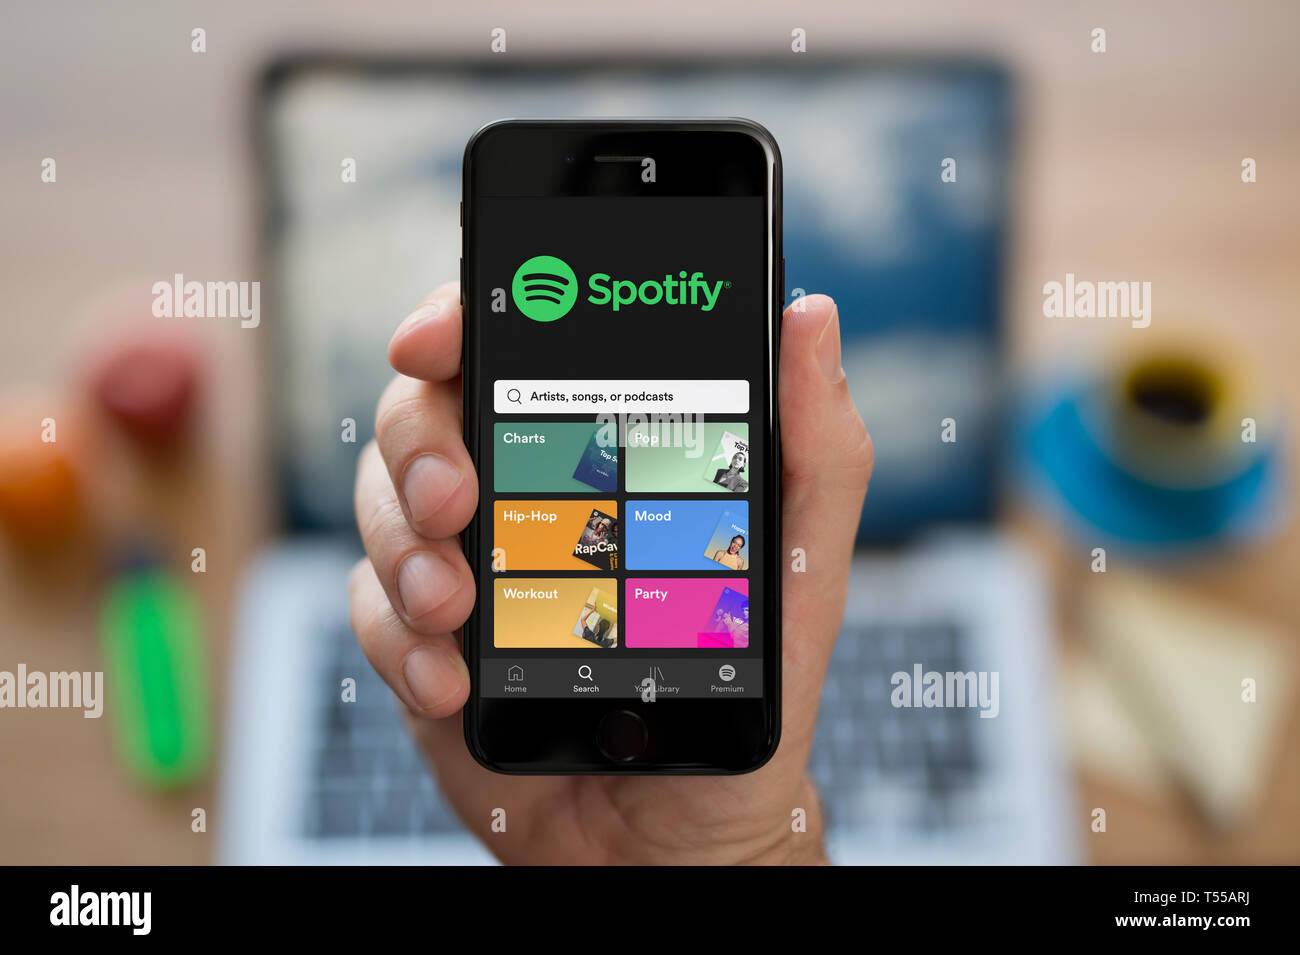 A man looks at his iPhone which displays the Spotify logo (Editorial use only). Stock Photo